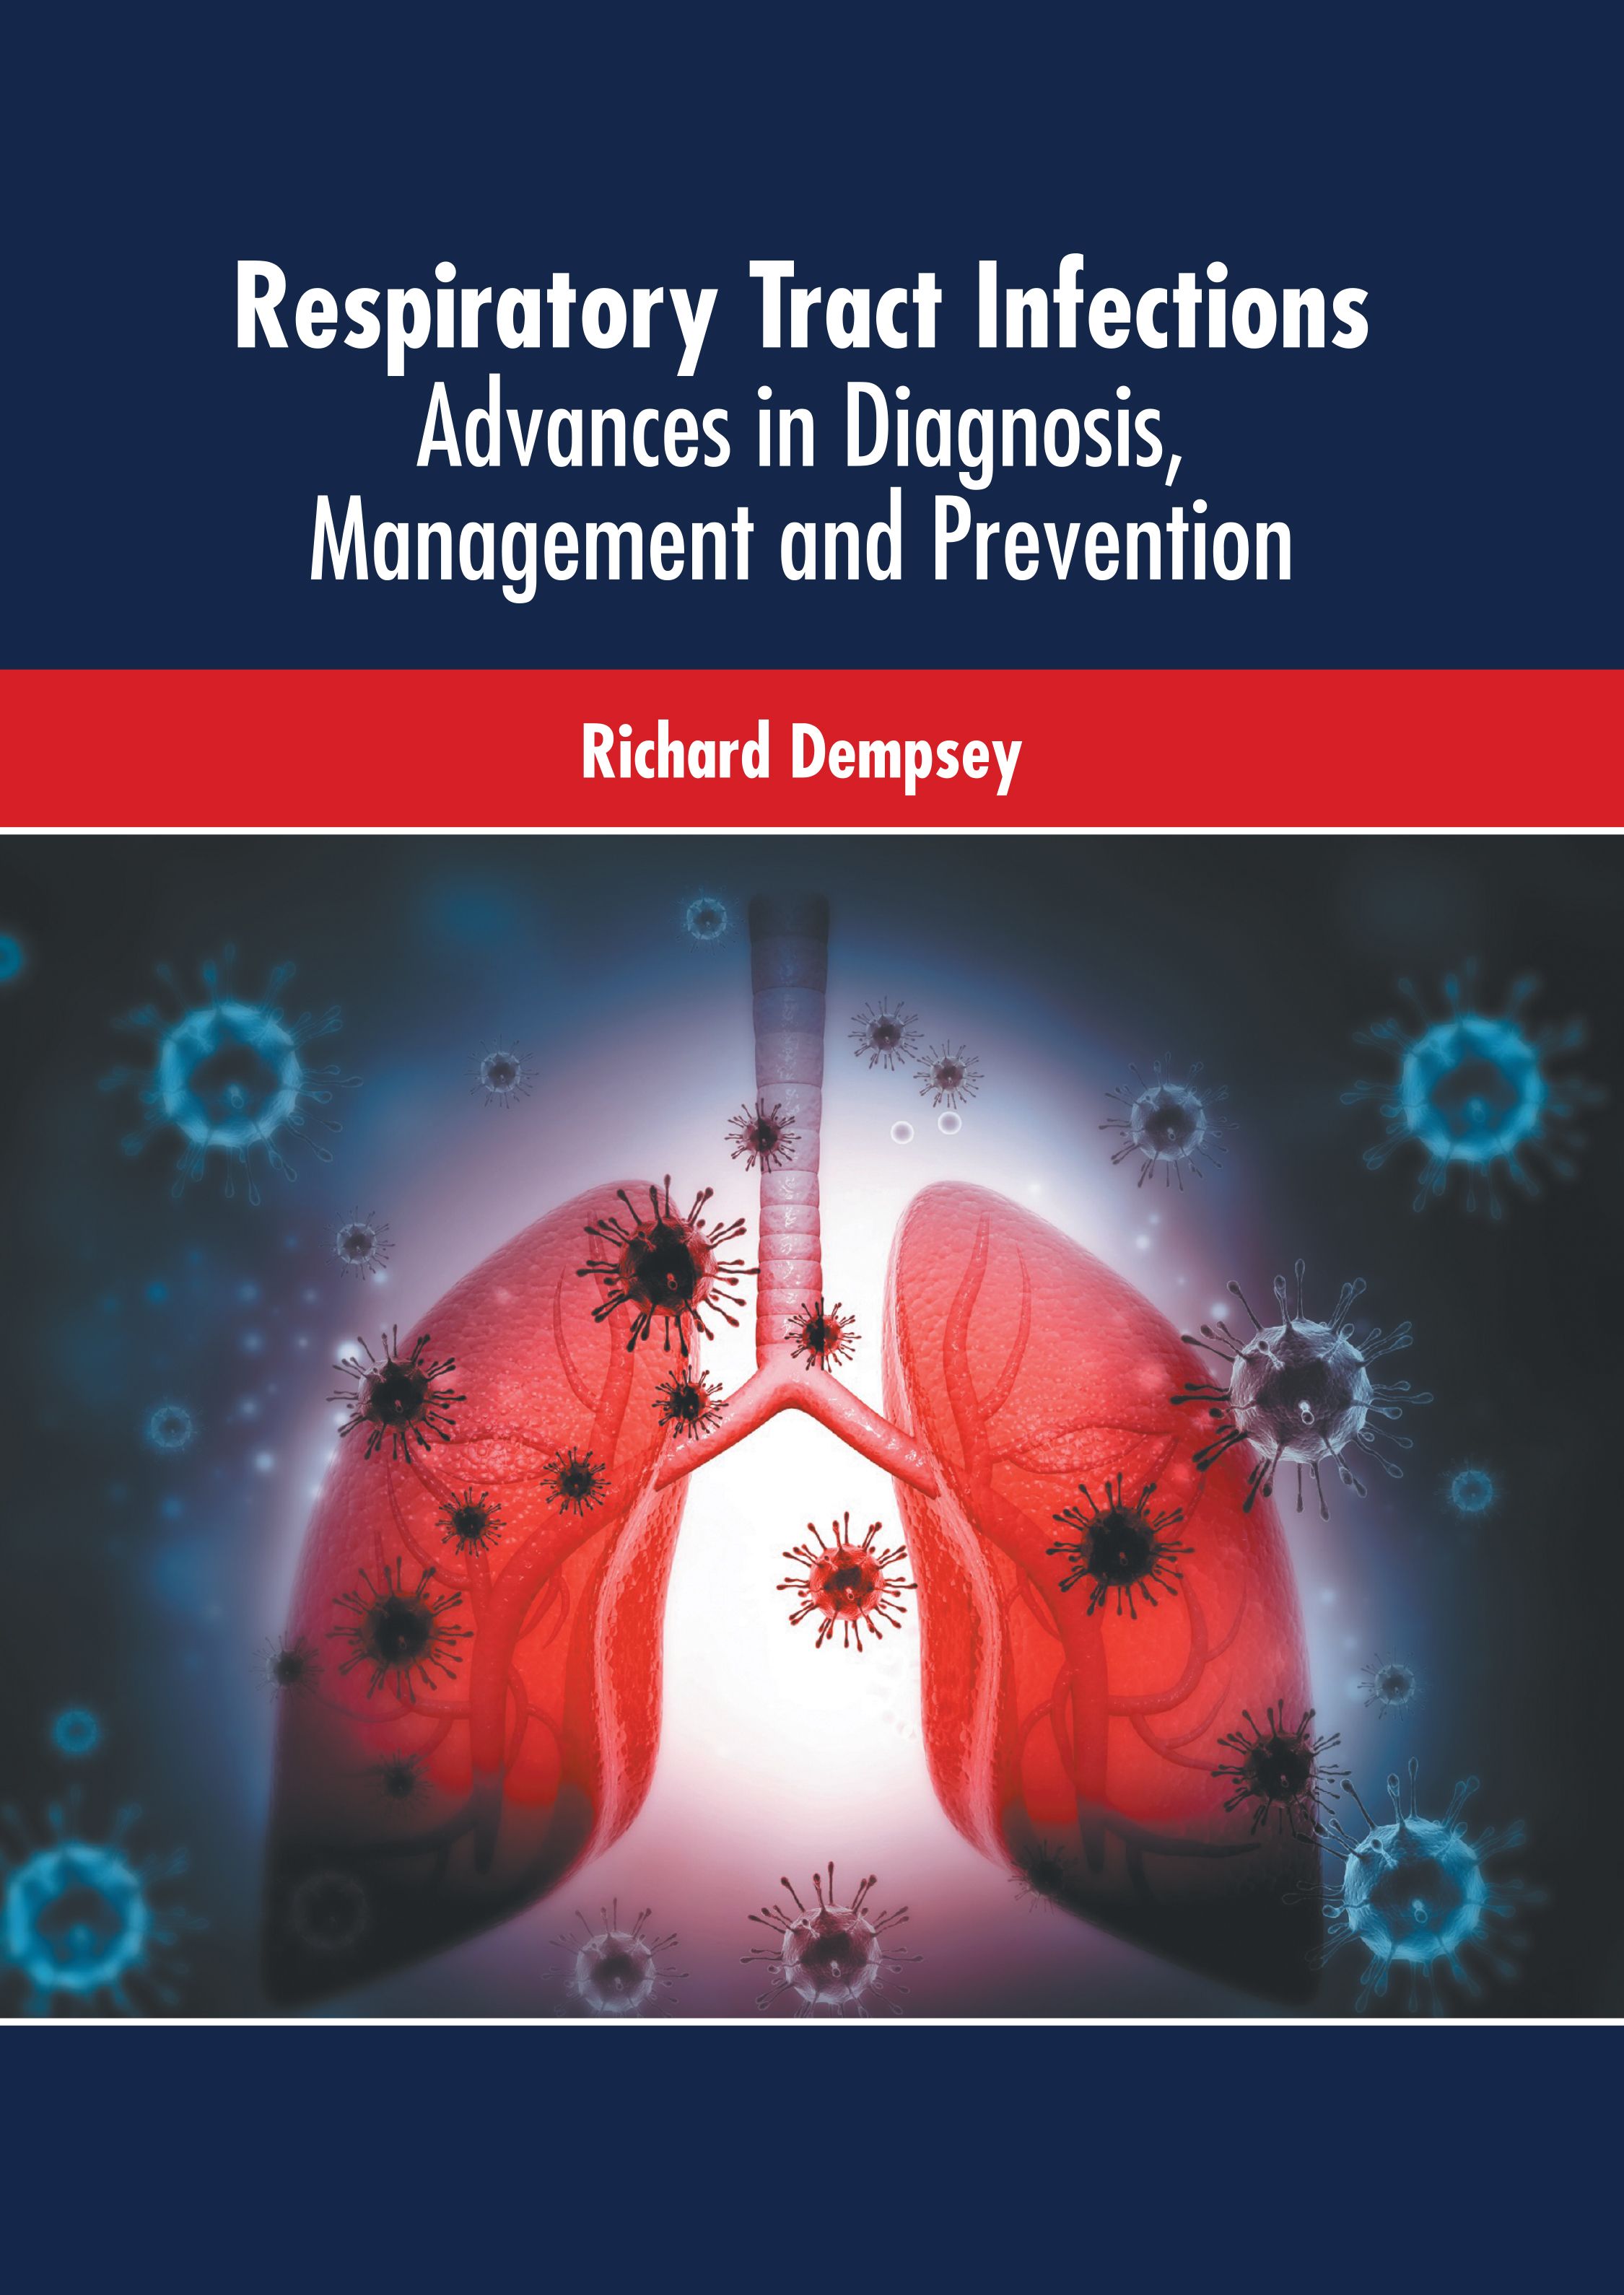 

medical-reference-books/respiratory-medicine/respiratory-tract-infections-advances-in-diagnosis-management-and-prevention-9781639274673